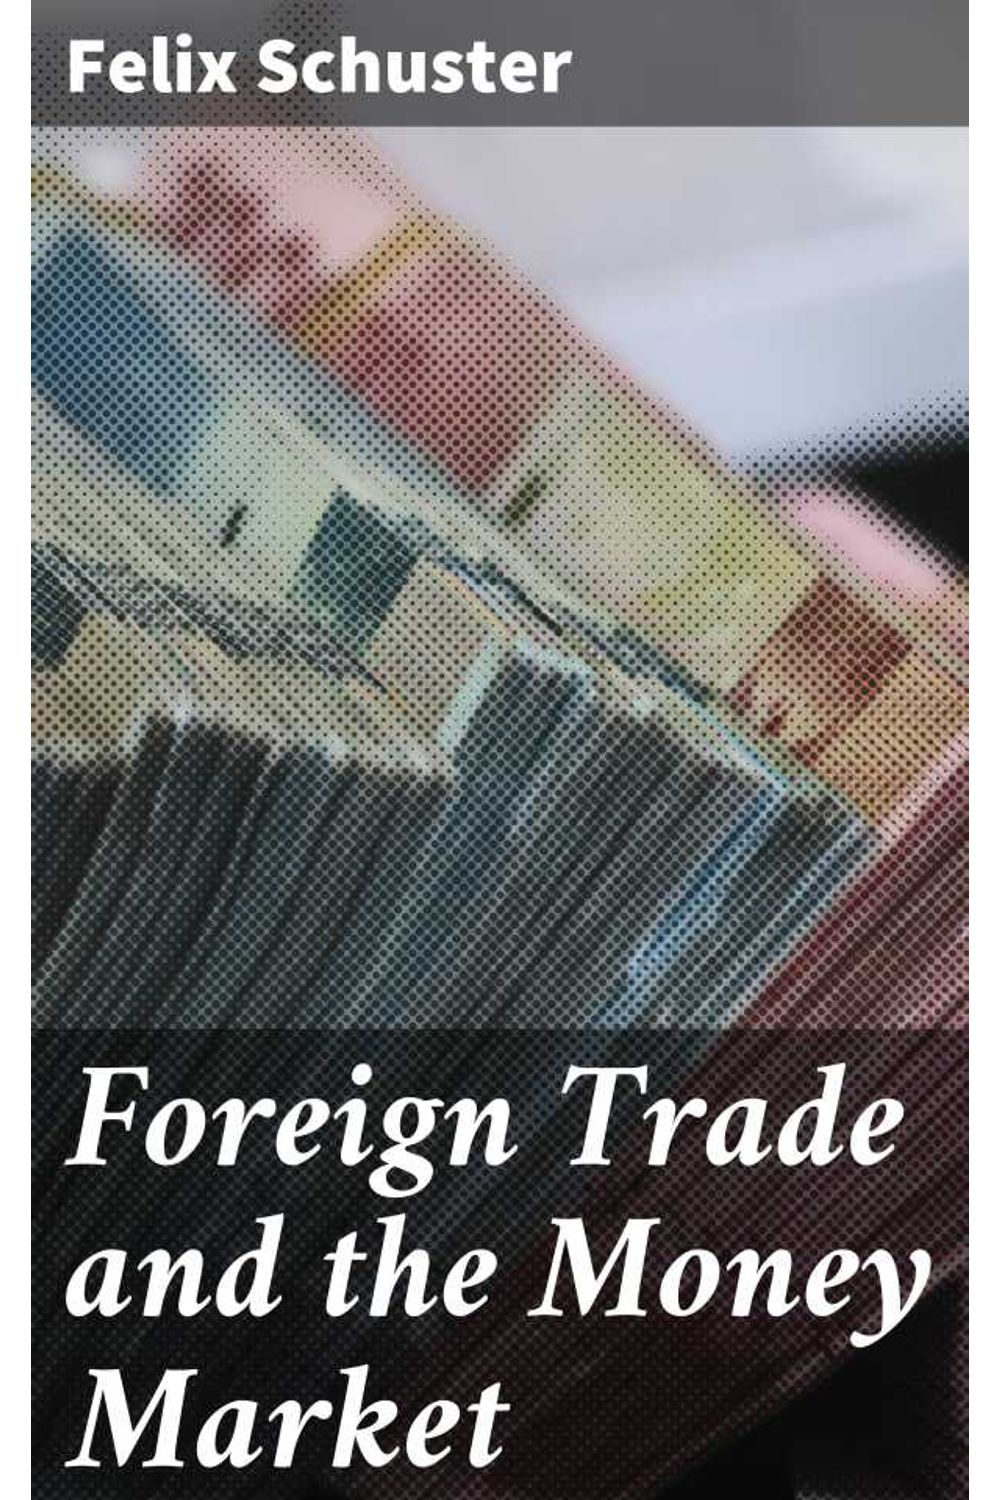 bw-foreign-trade-and-the-money-market-good-press-4064066442705